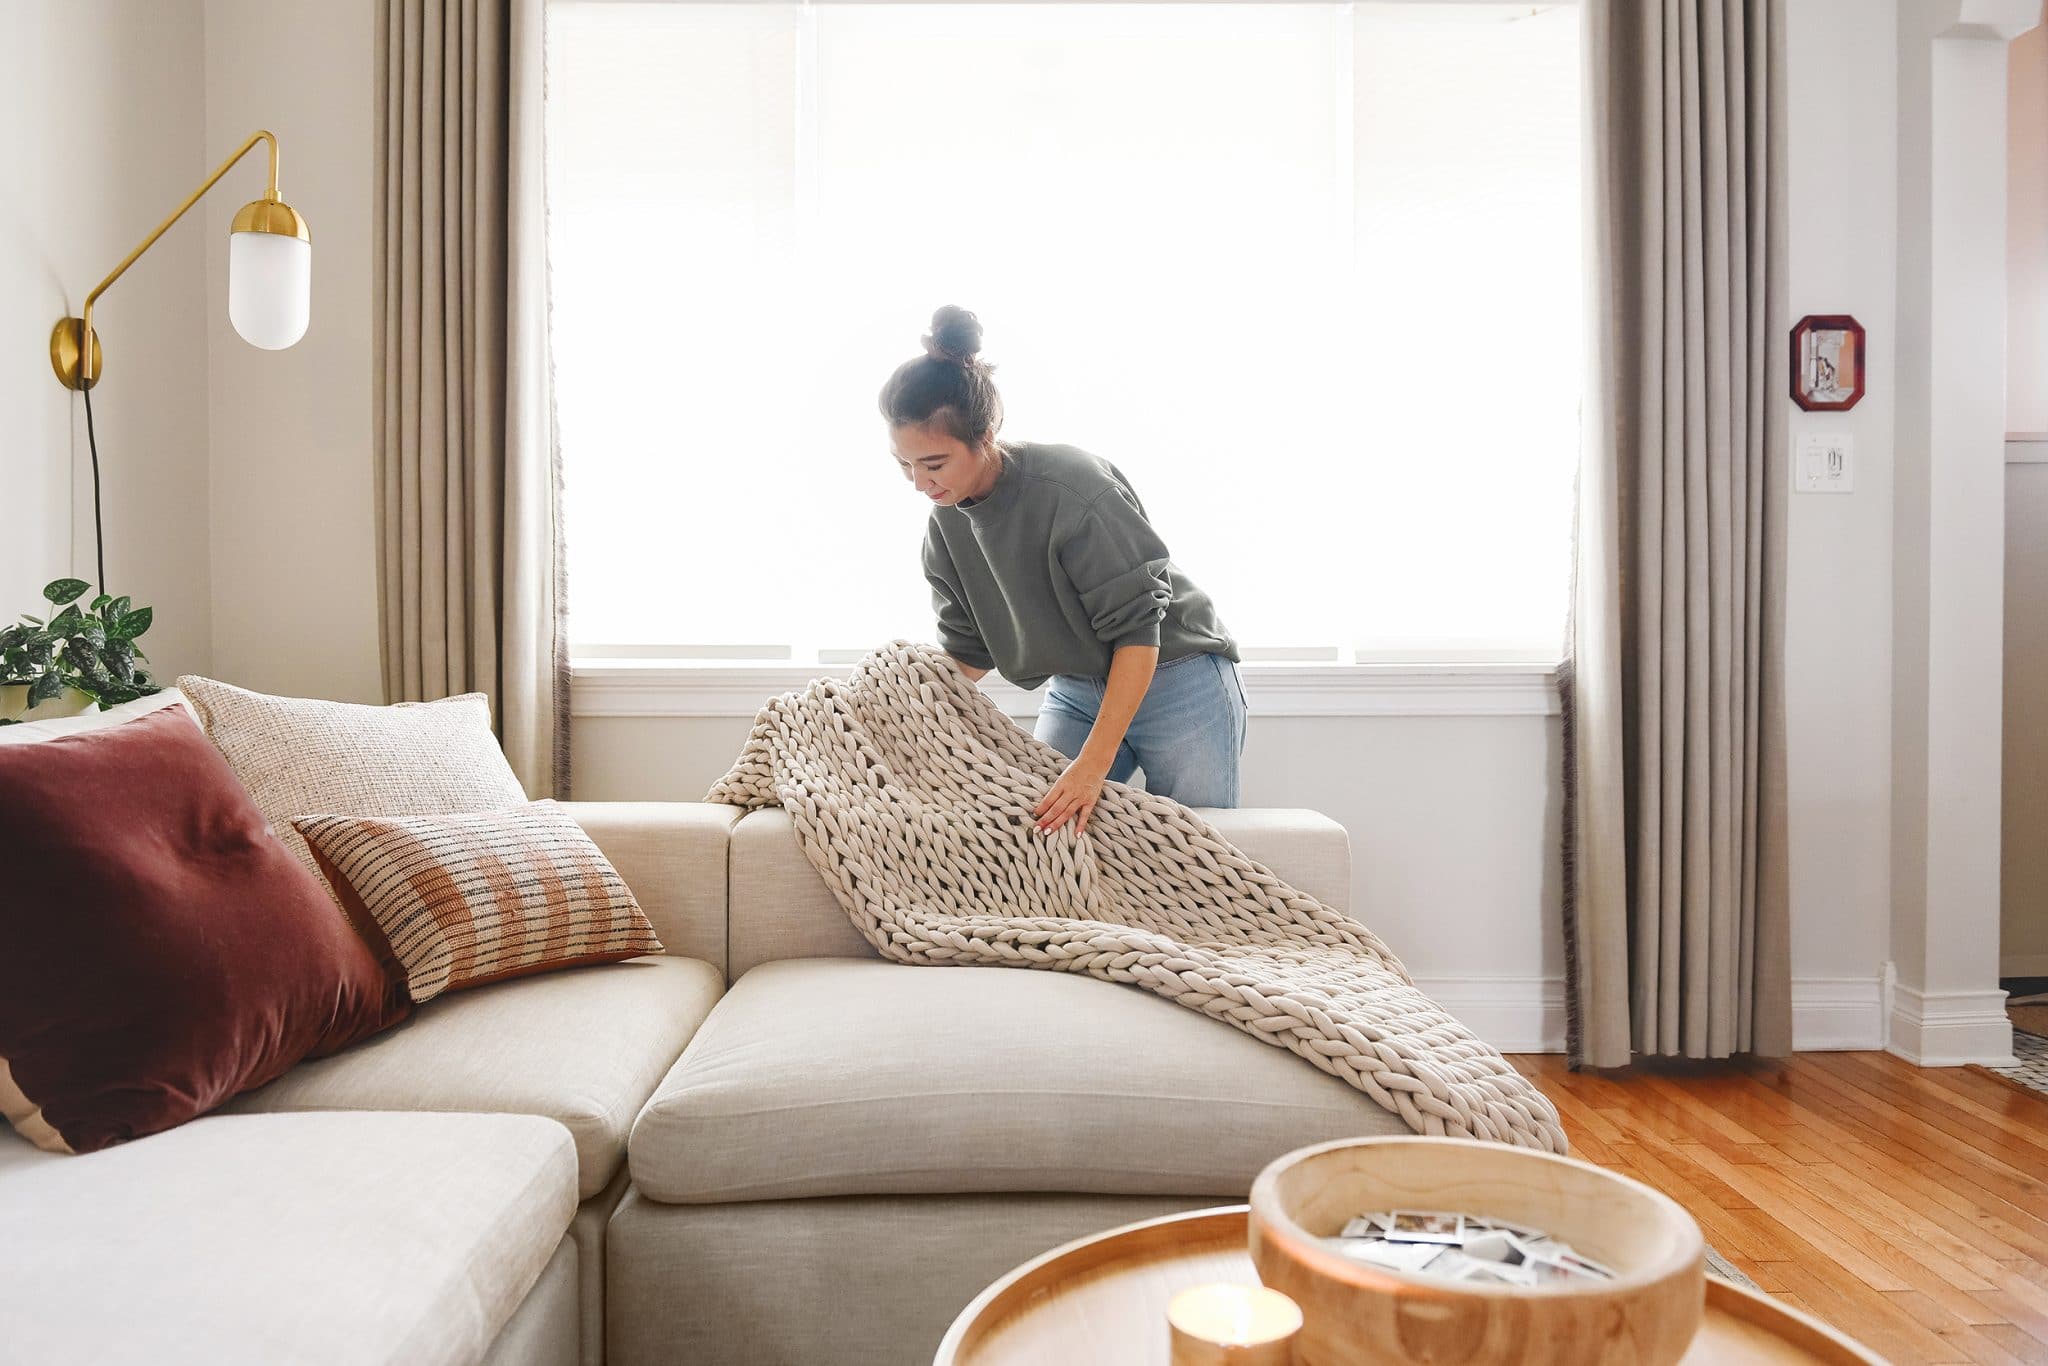 Styling a weighted blanket on the sofa | I'm sharing my simple, inviting formula for styling pillows on an L-shaped or U-shaped sofa, via Yellow Brick Home